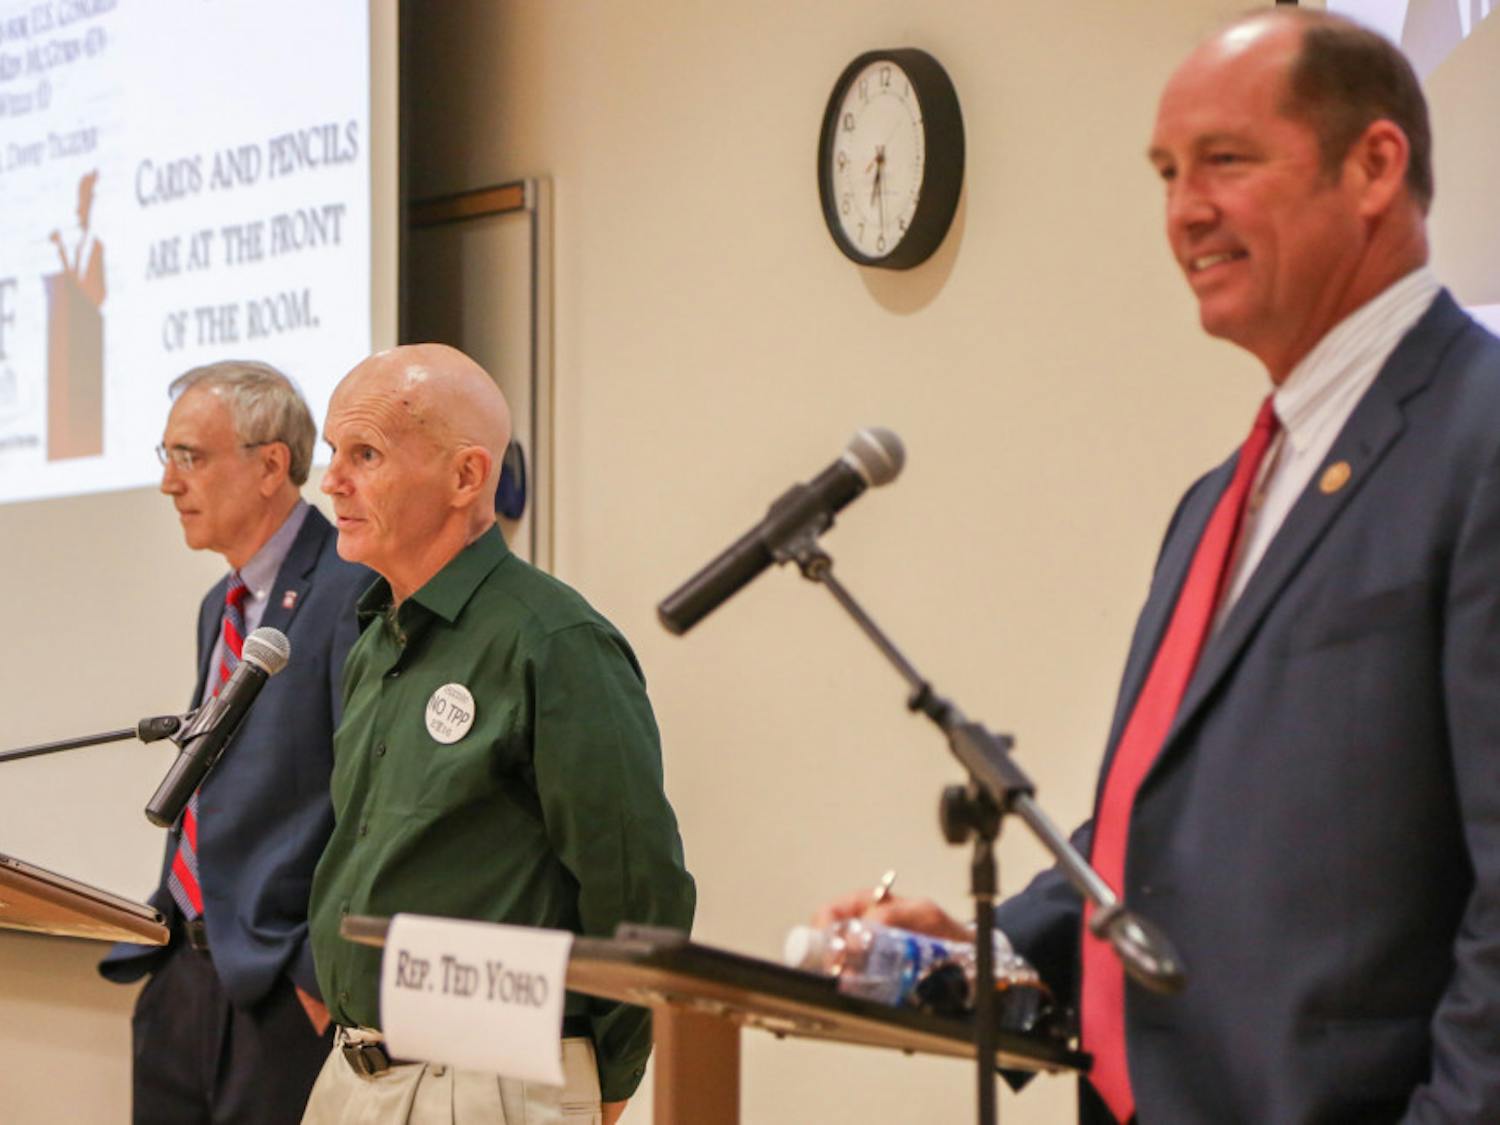 From left: U.S. congressional candidates Democrat Ken McGurn, independent Tom Wells and Republican Ted Yoho debated on Thursday evening at Santa Fe College during the Candidate Forums event, moderated by David Tegeder. 